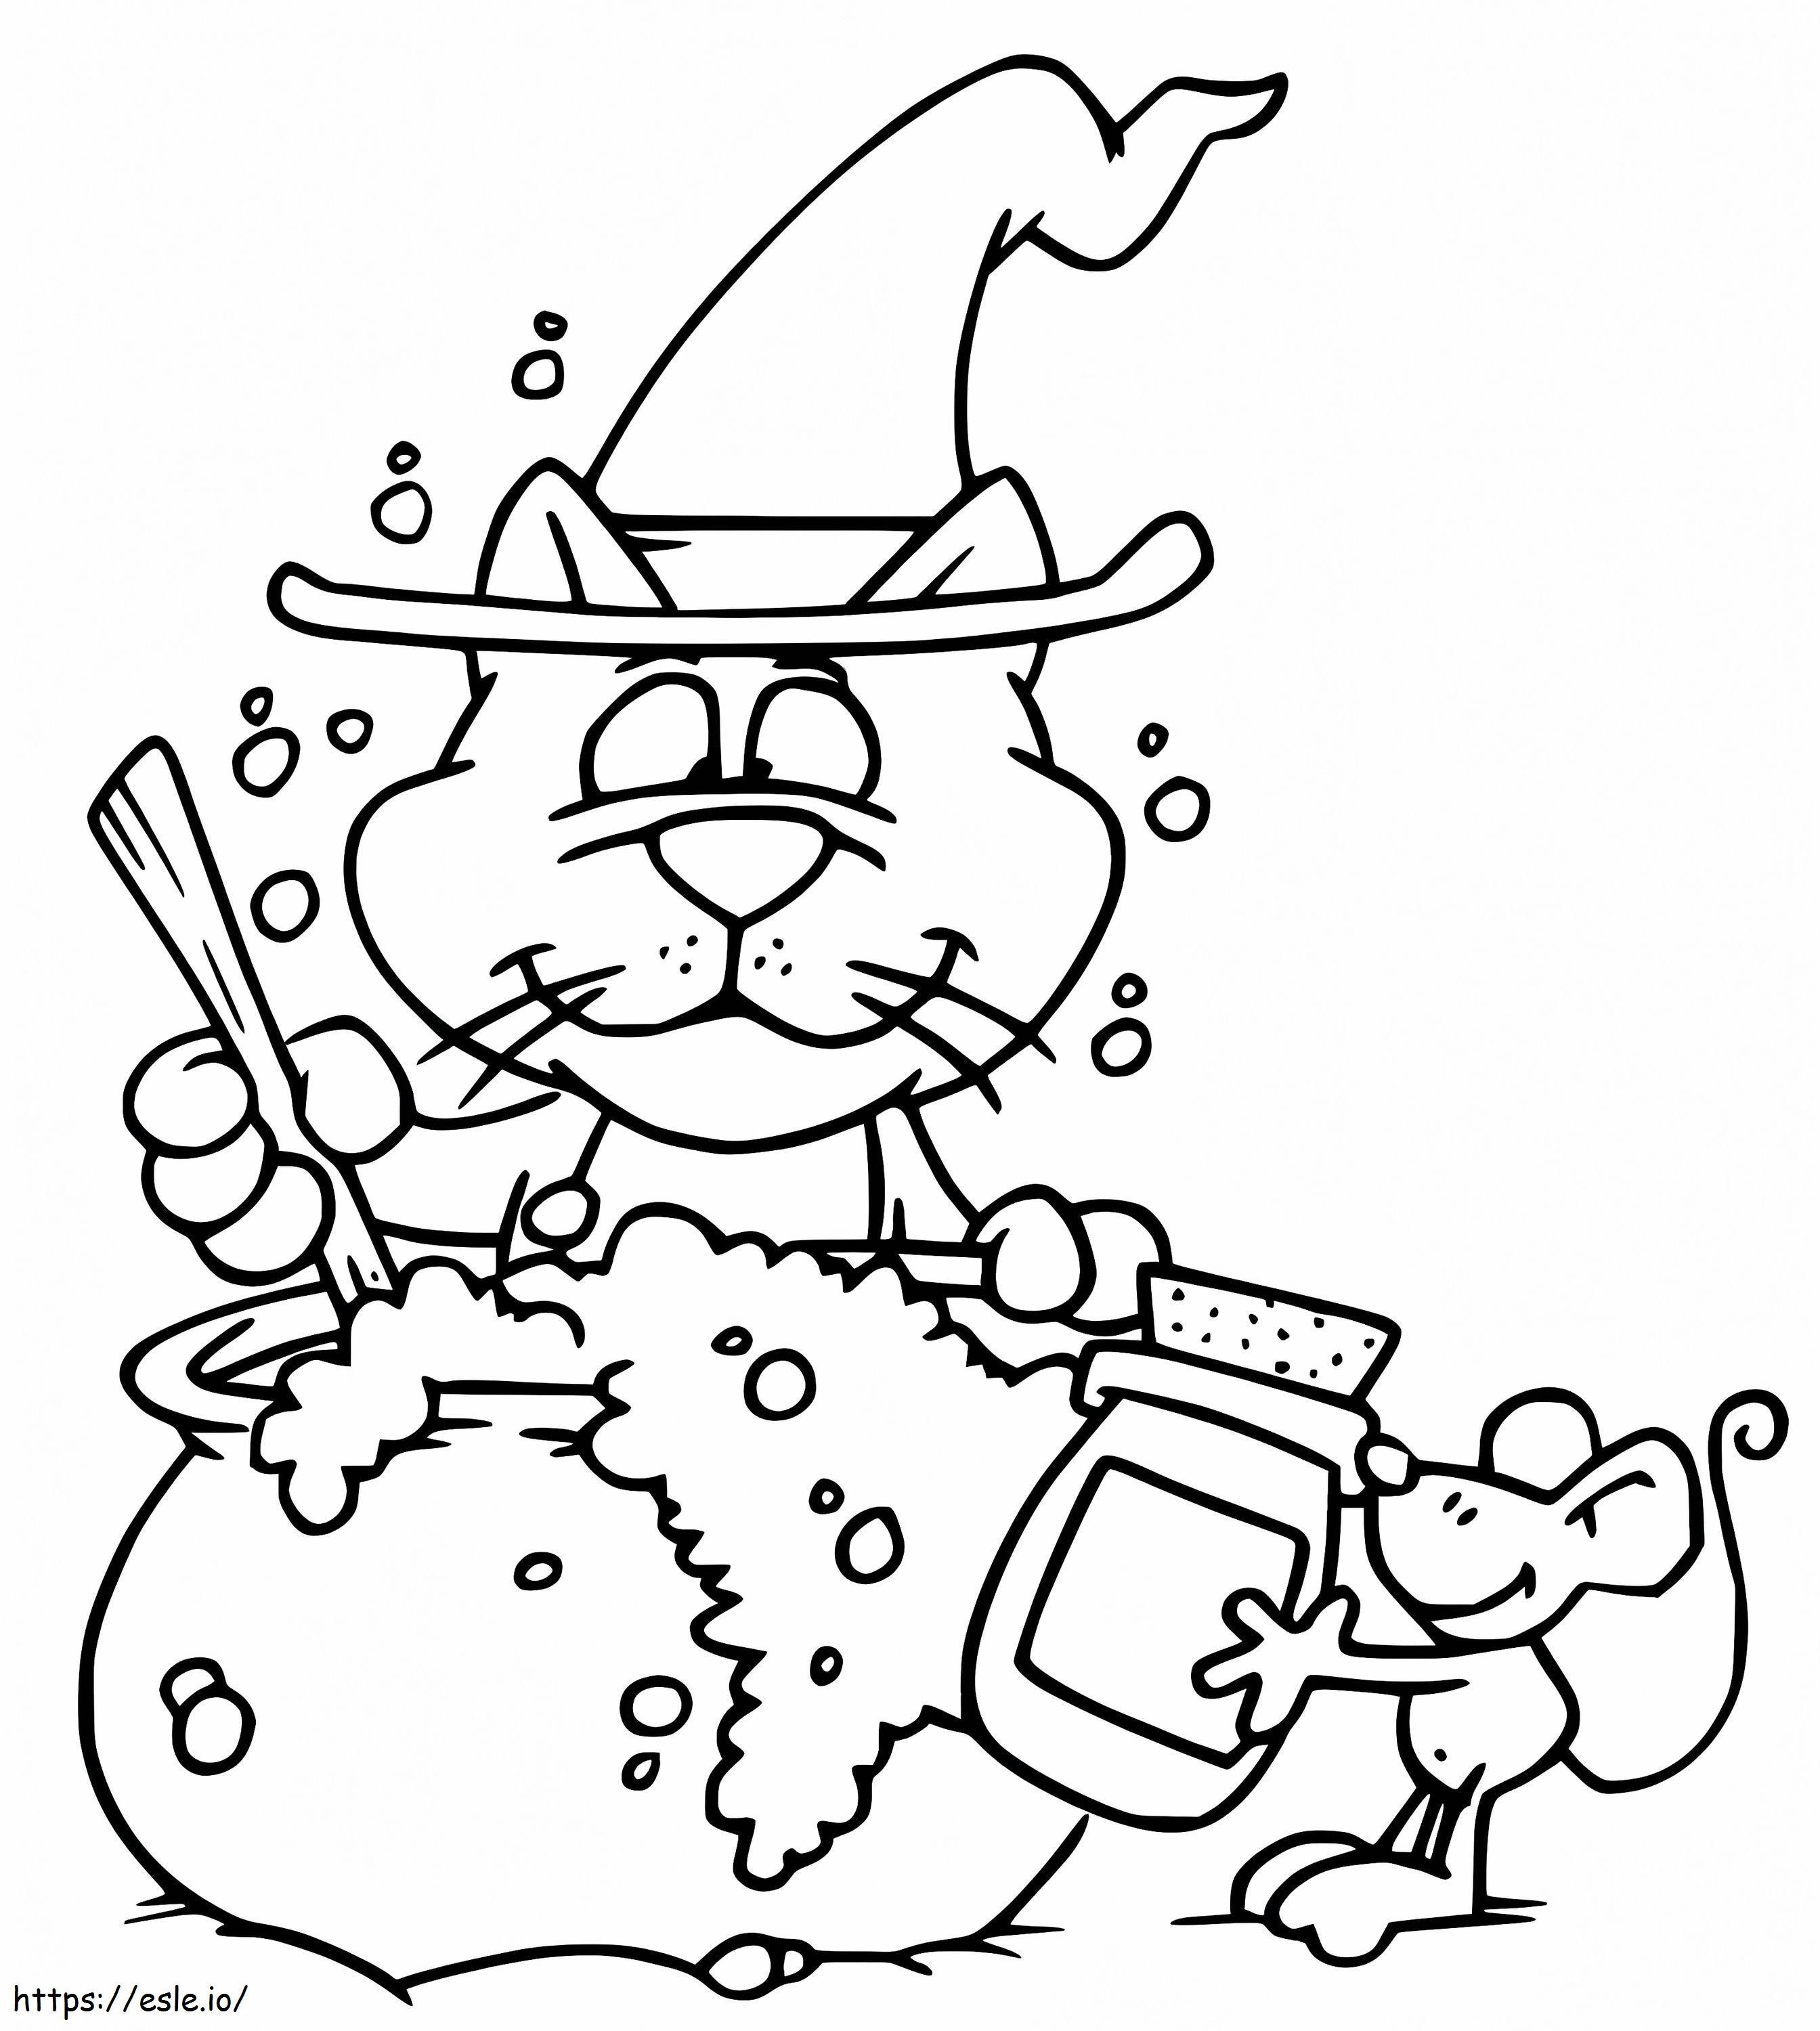 Halloween Cat And Mouse coloring page